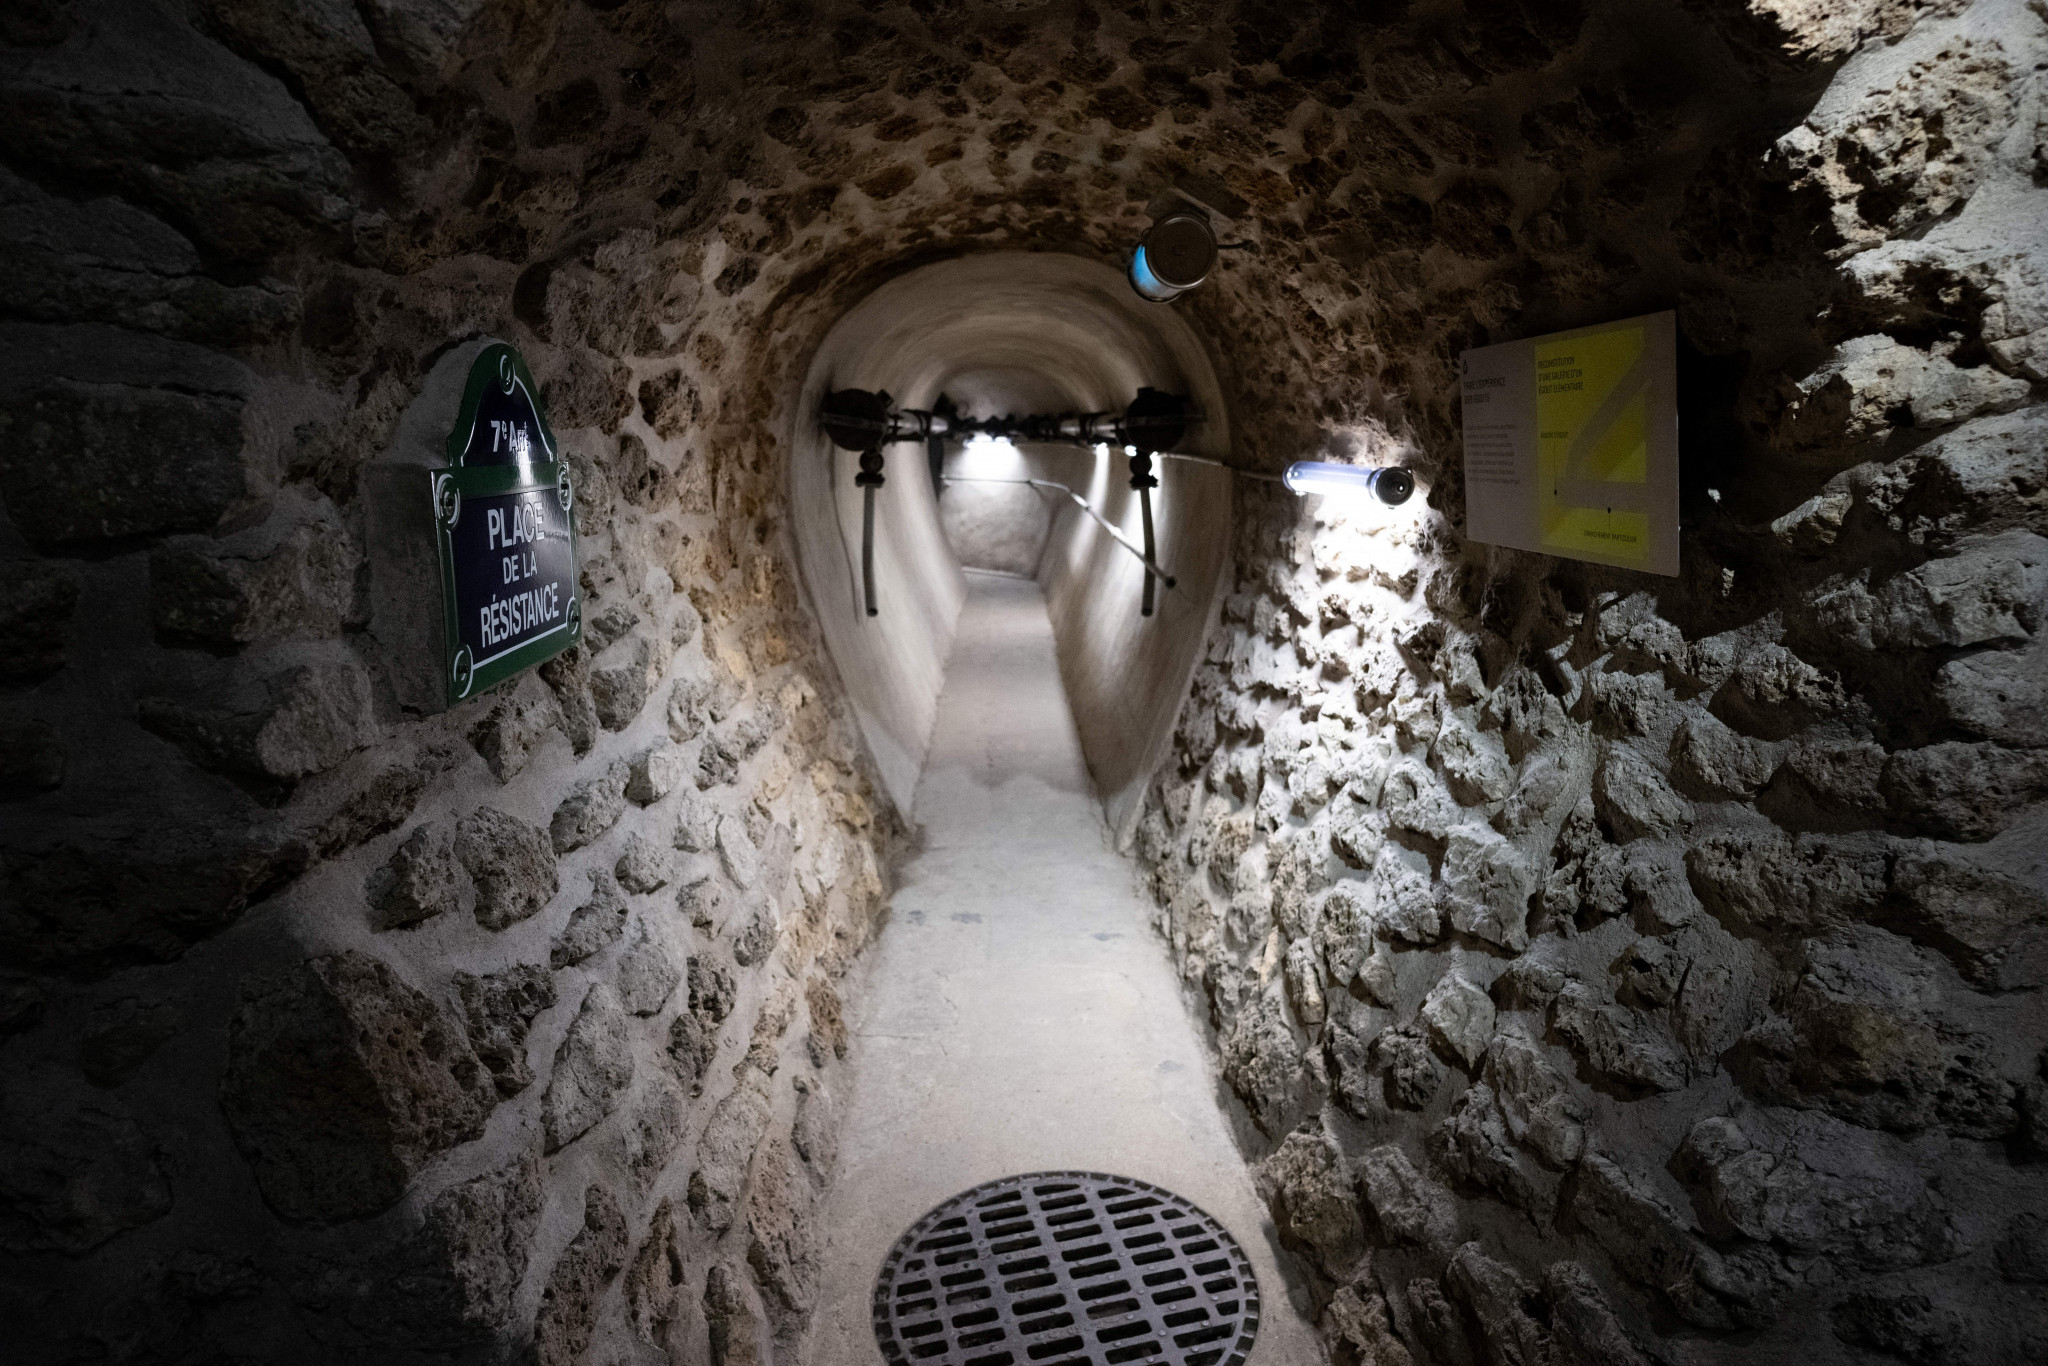 View of the Paris Sewers Museum. GETTY IMAGES